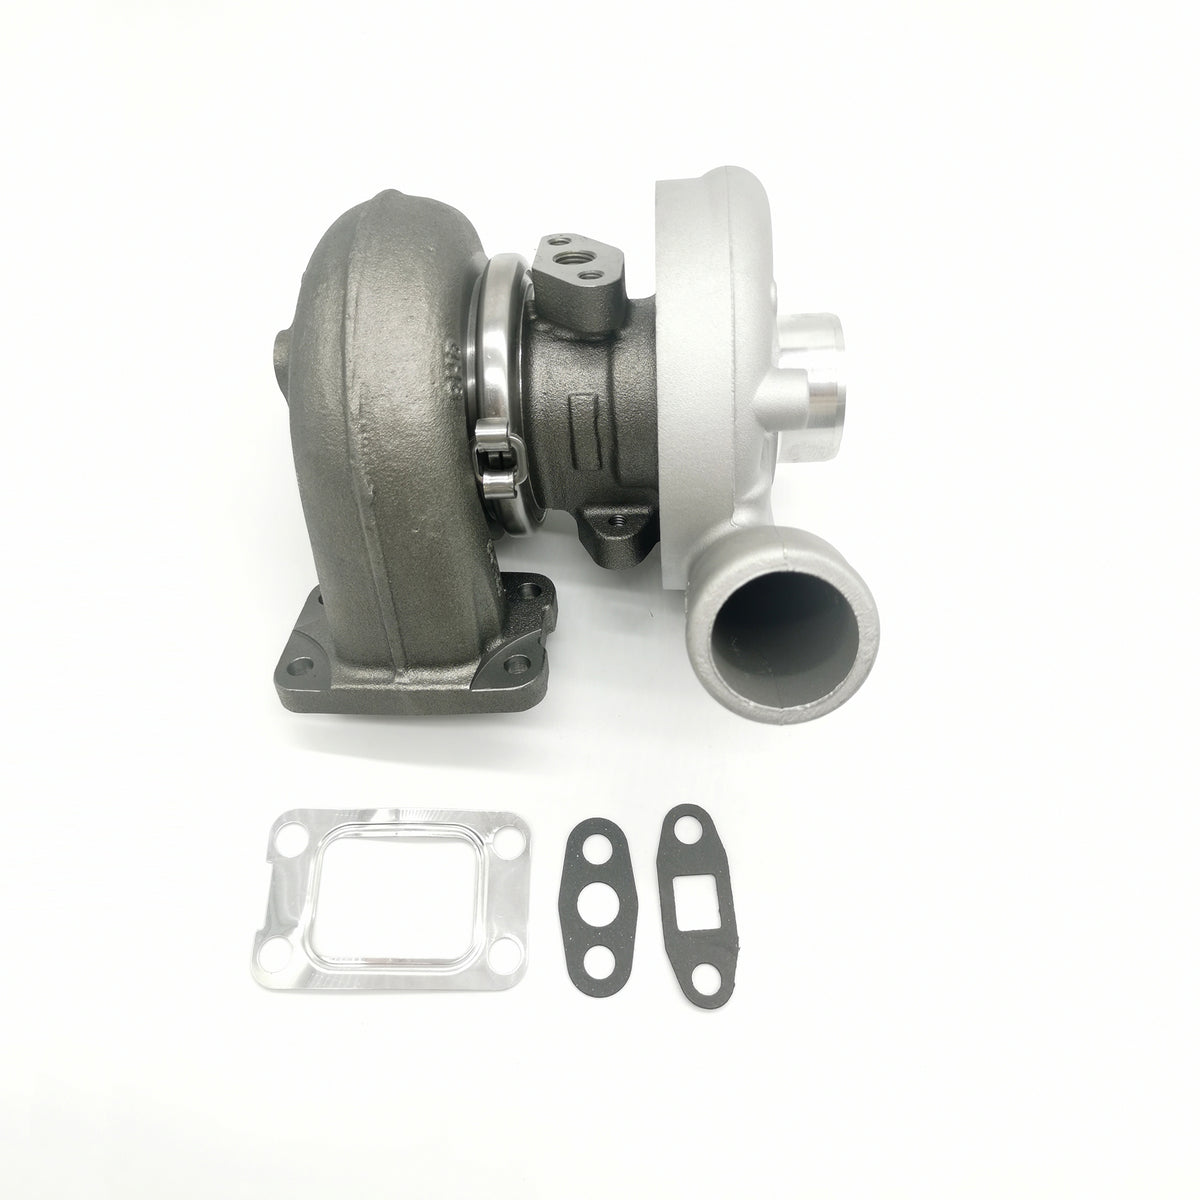 Turbocharger 2674A152 for Perkins Engine T3.1524 - KUDUPARTS